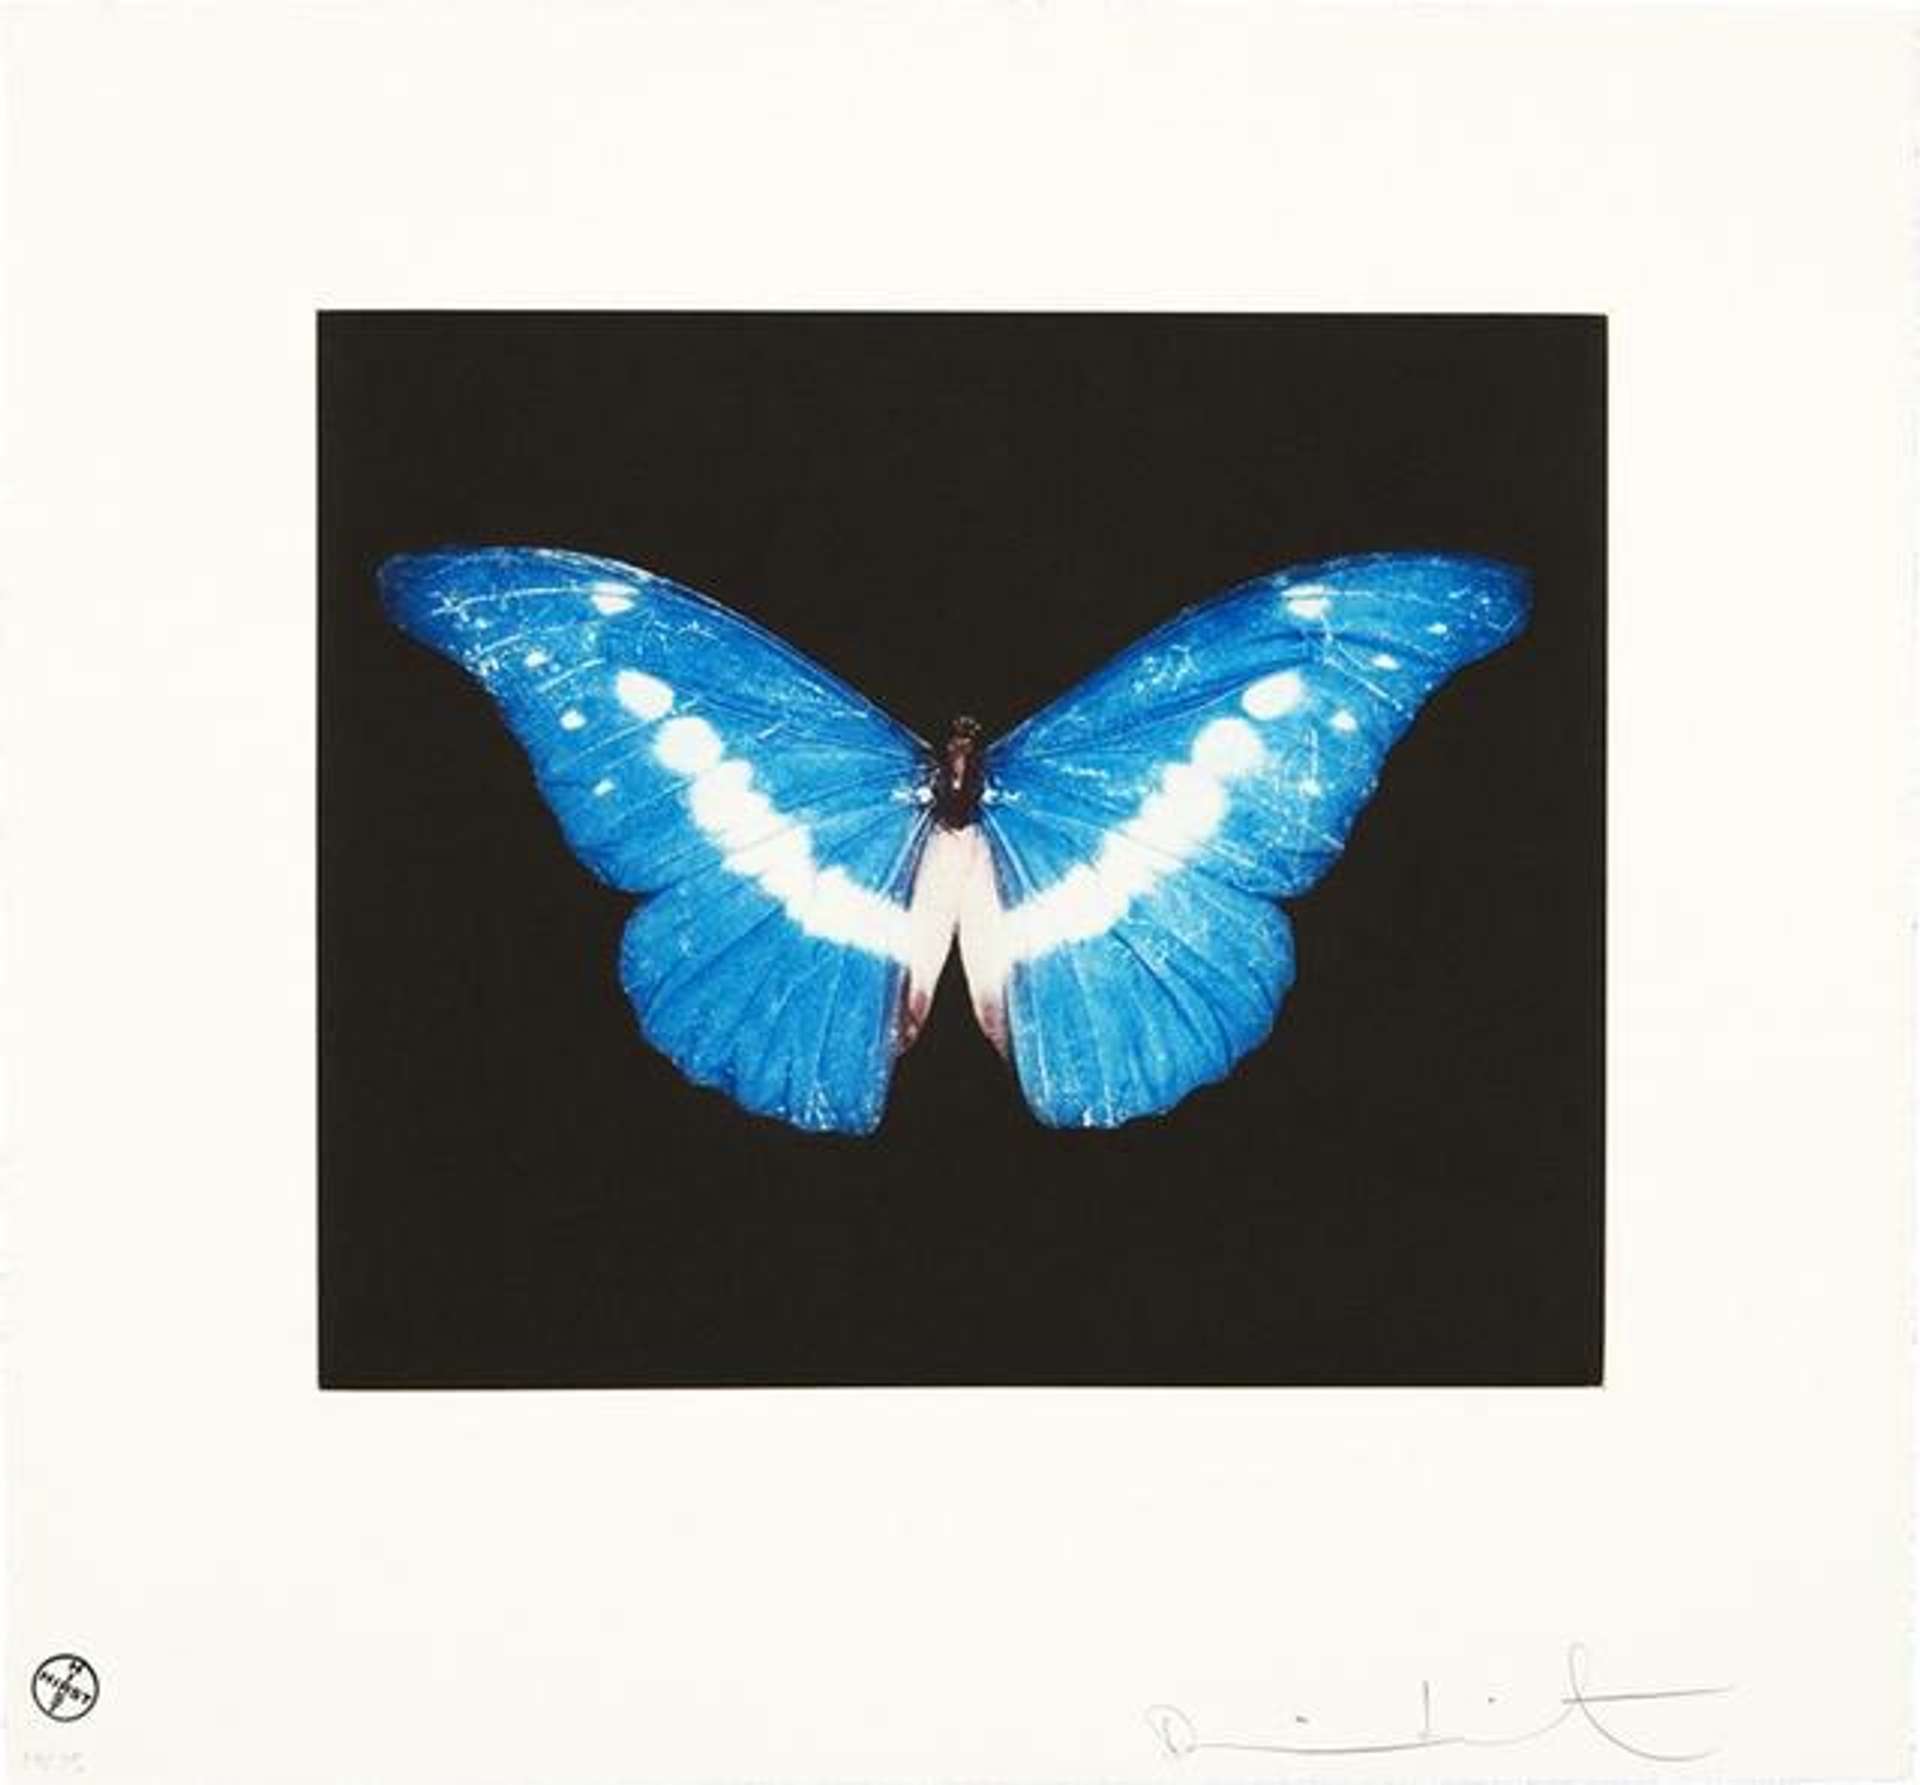 Damien Hirst: To Begin - Signed Print